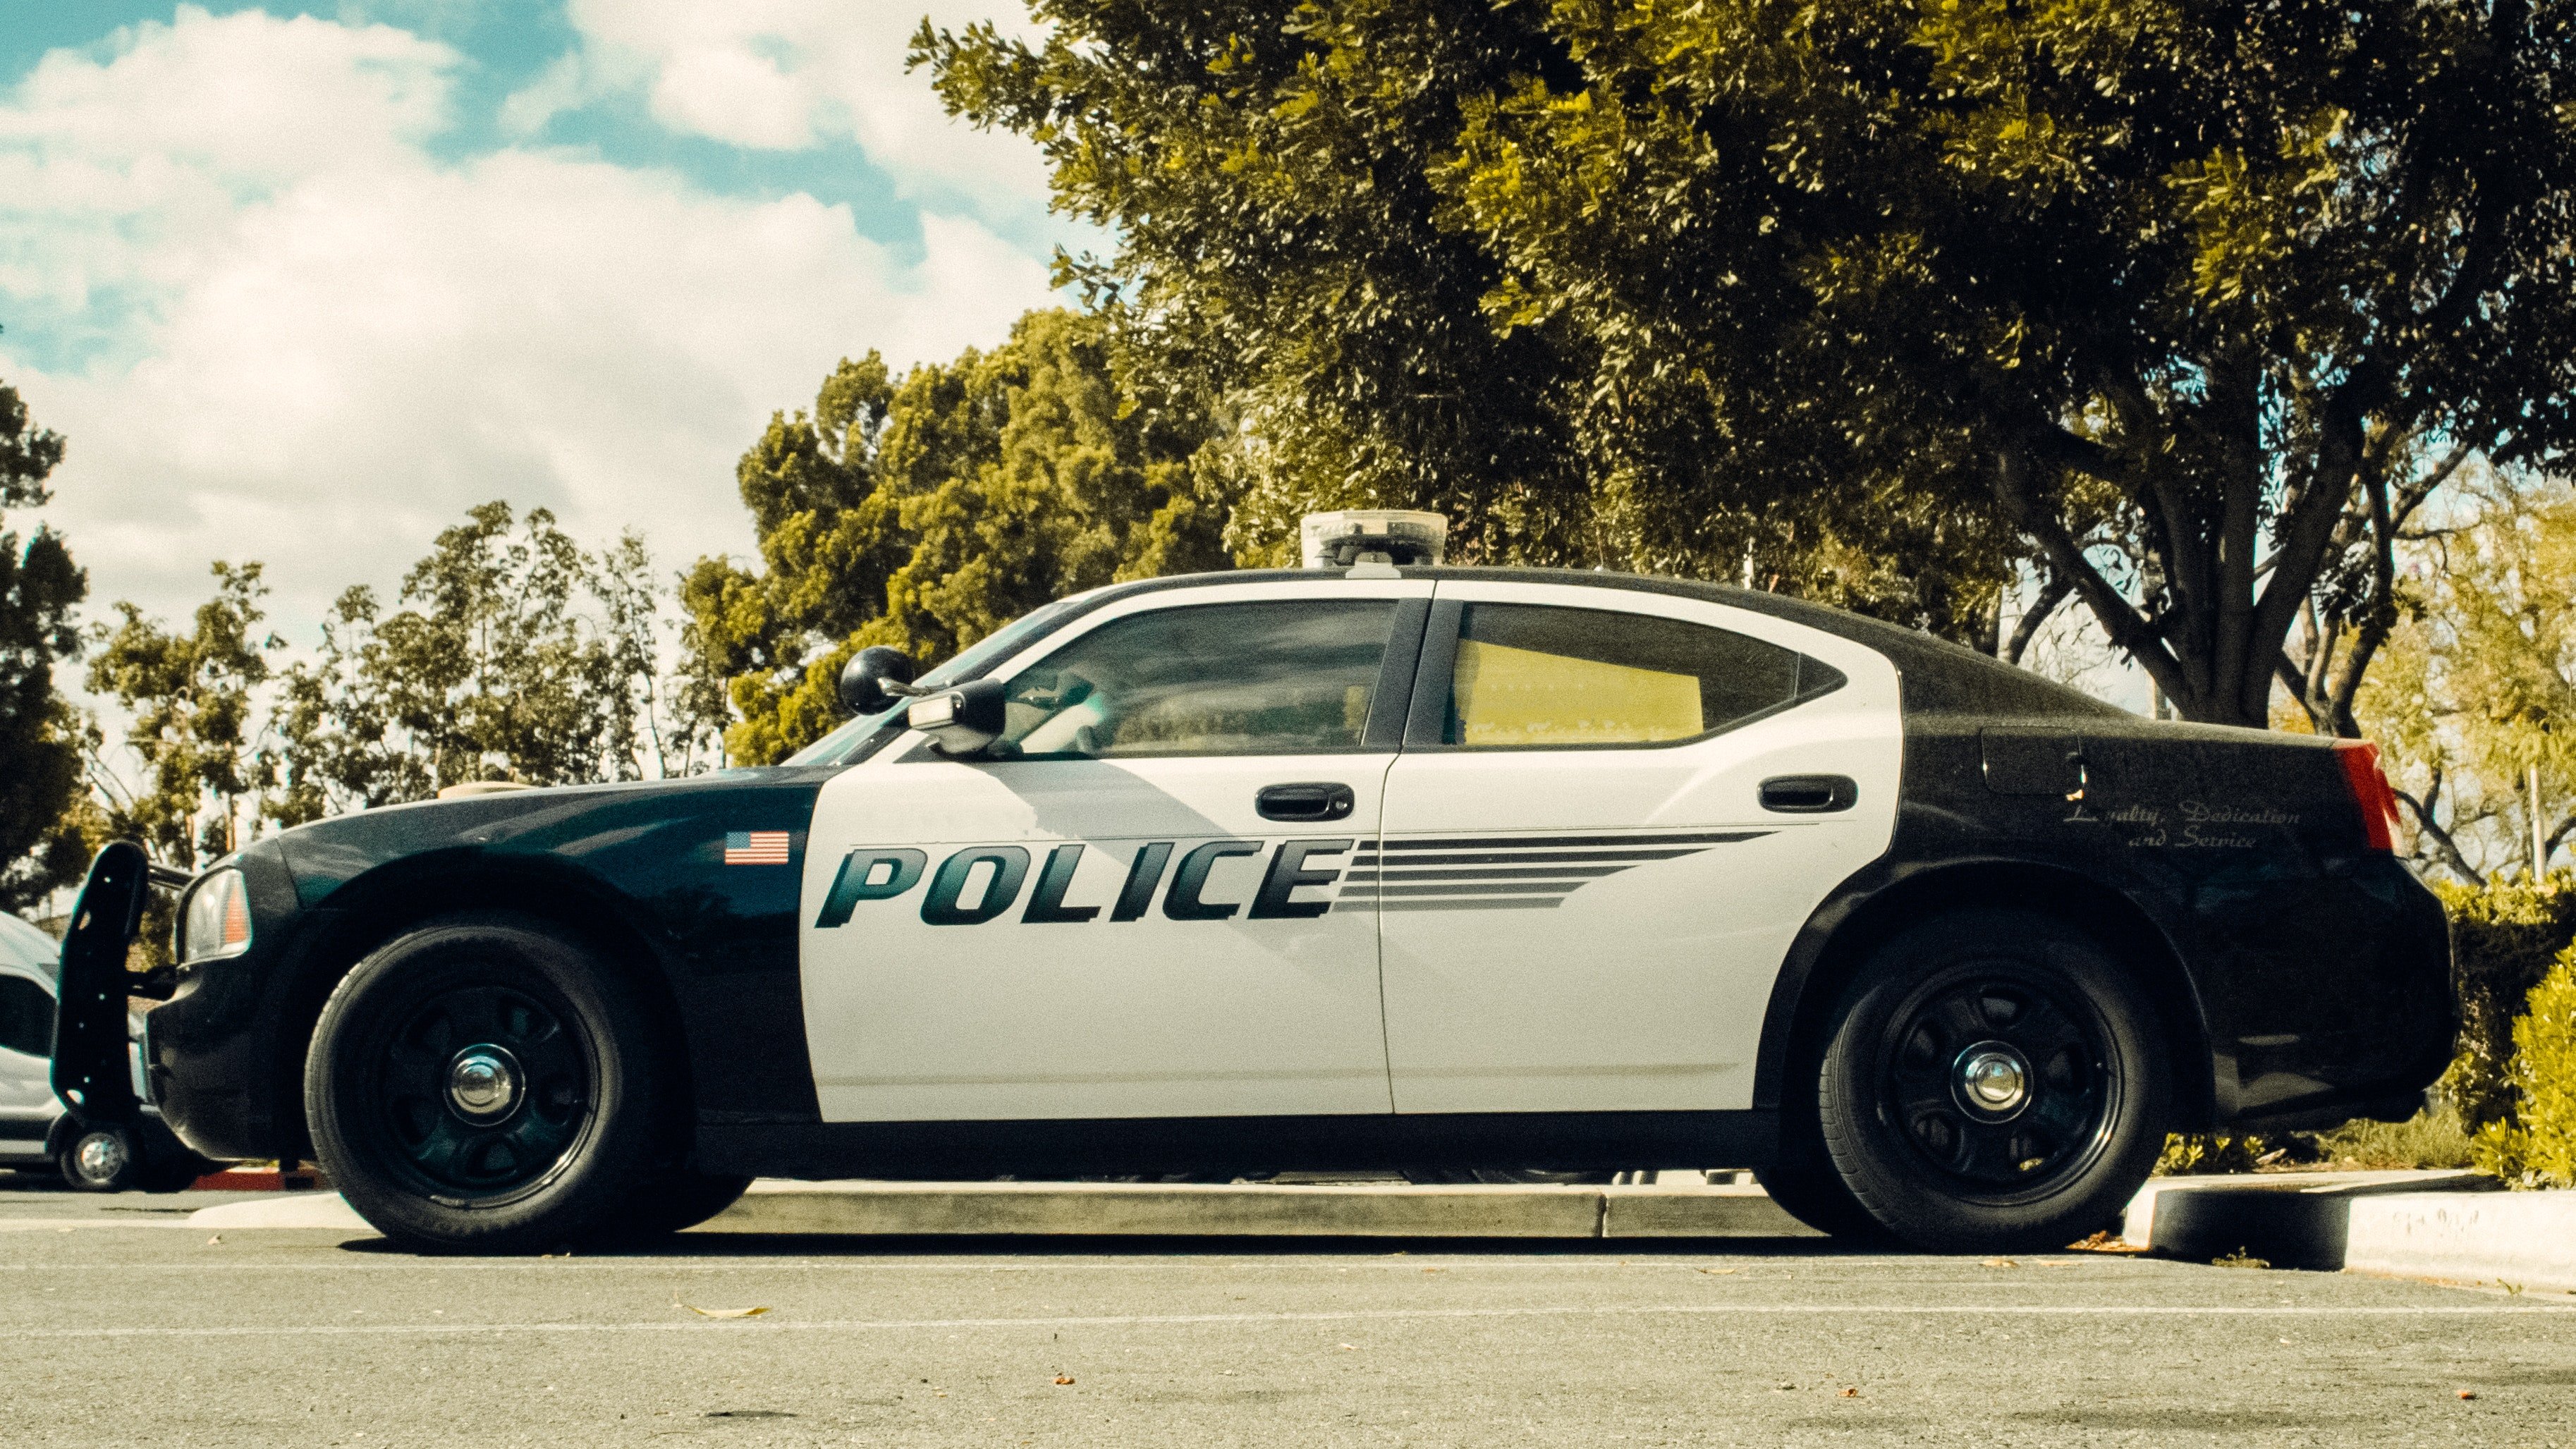 Pictured - A black and white police vehicle parked | Source: Pexels 